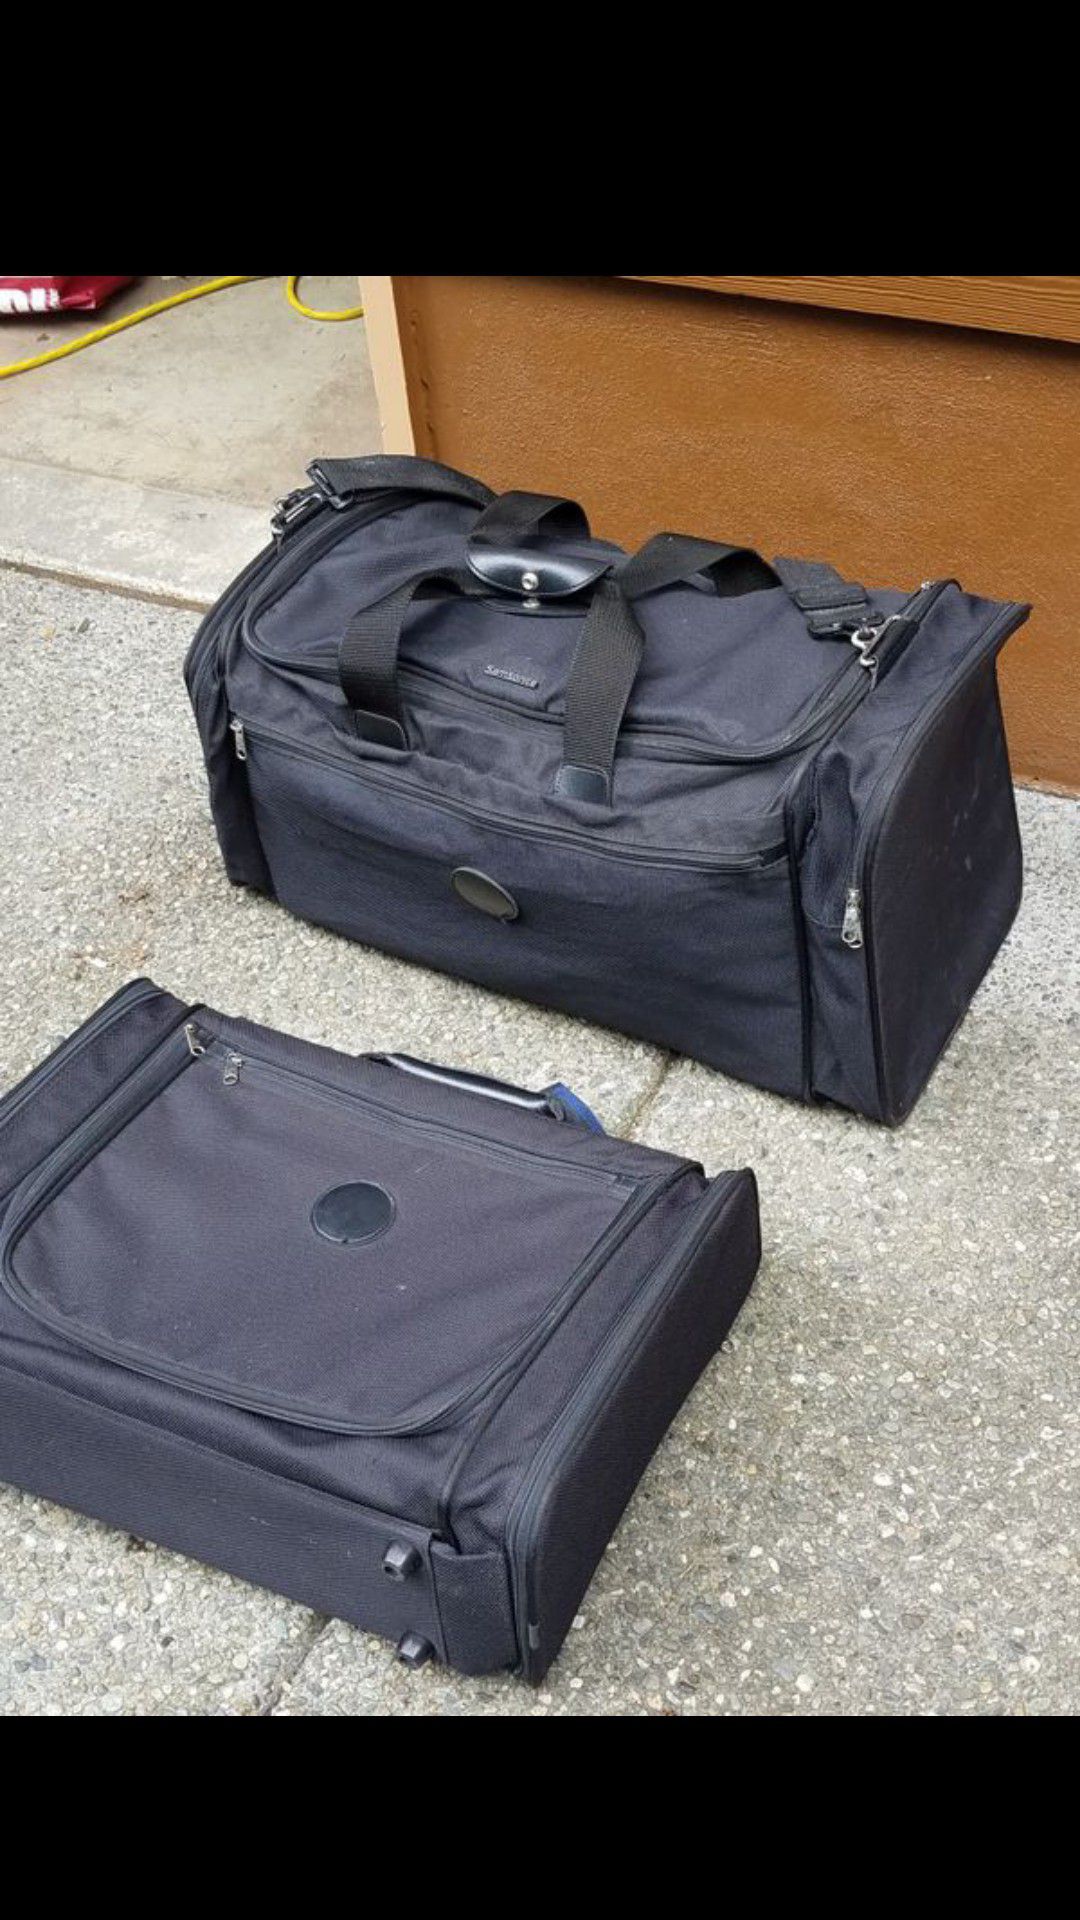 Samsonite duffle bag / suitcase in excellent condition like brand new. Used only once. No smells. No smoke no pets